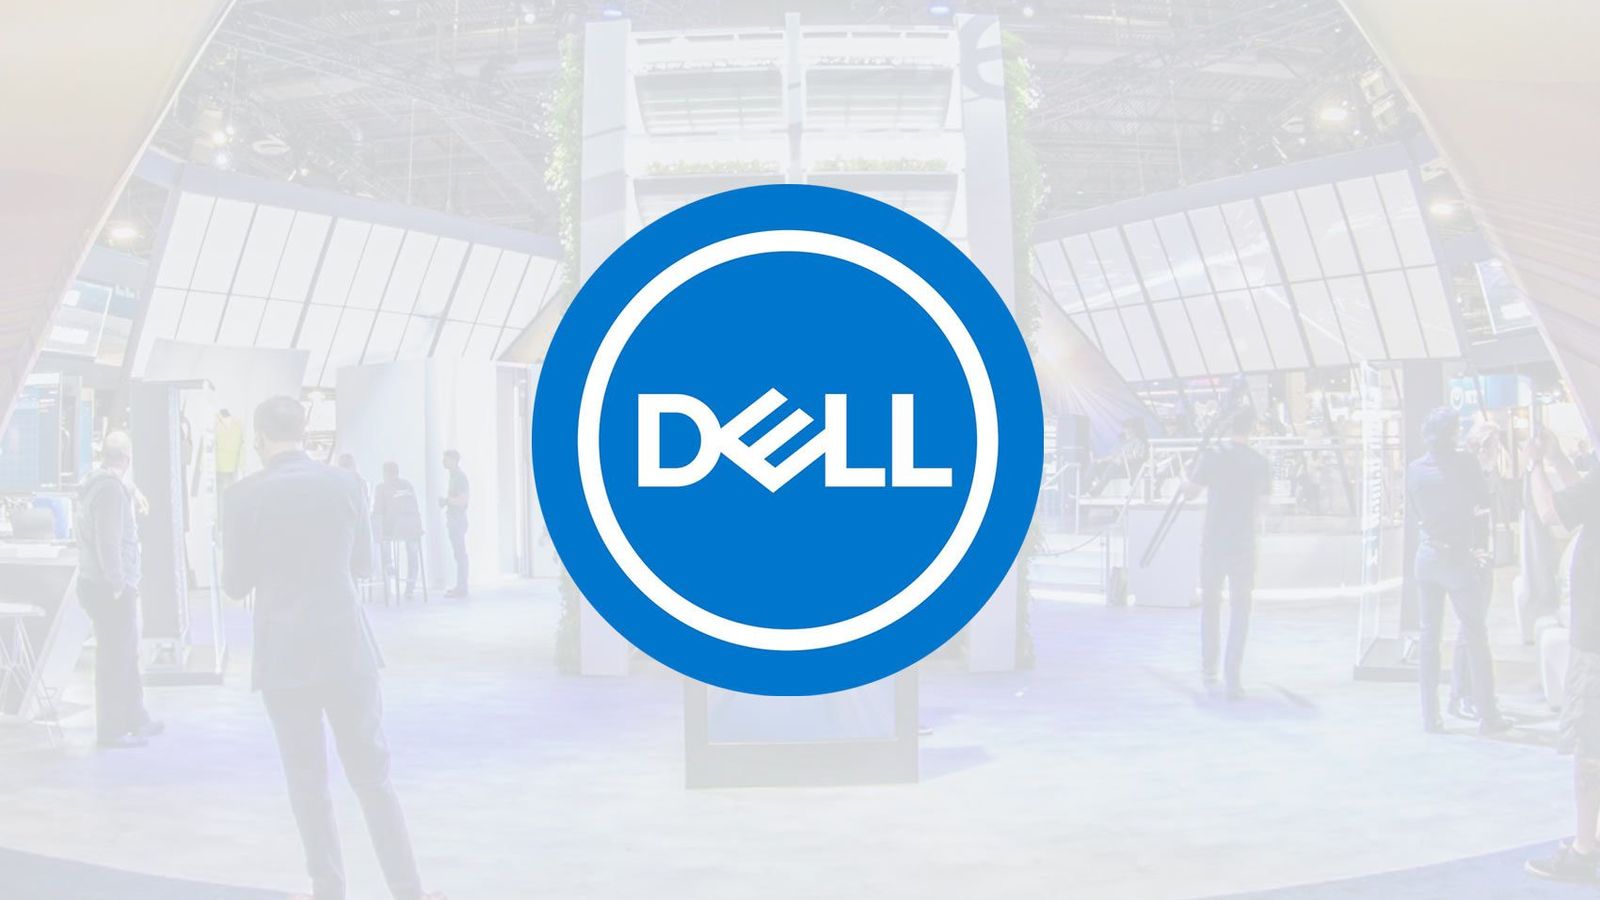 Fueling Dell’s Extended Enterprise learning strategy for employees, partners and customers